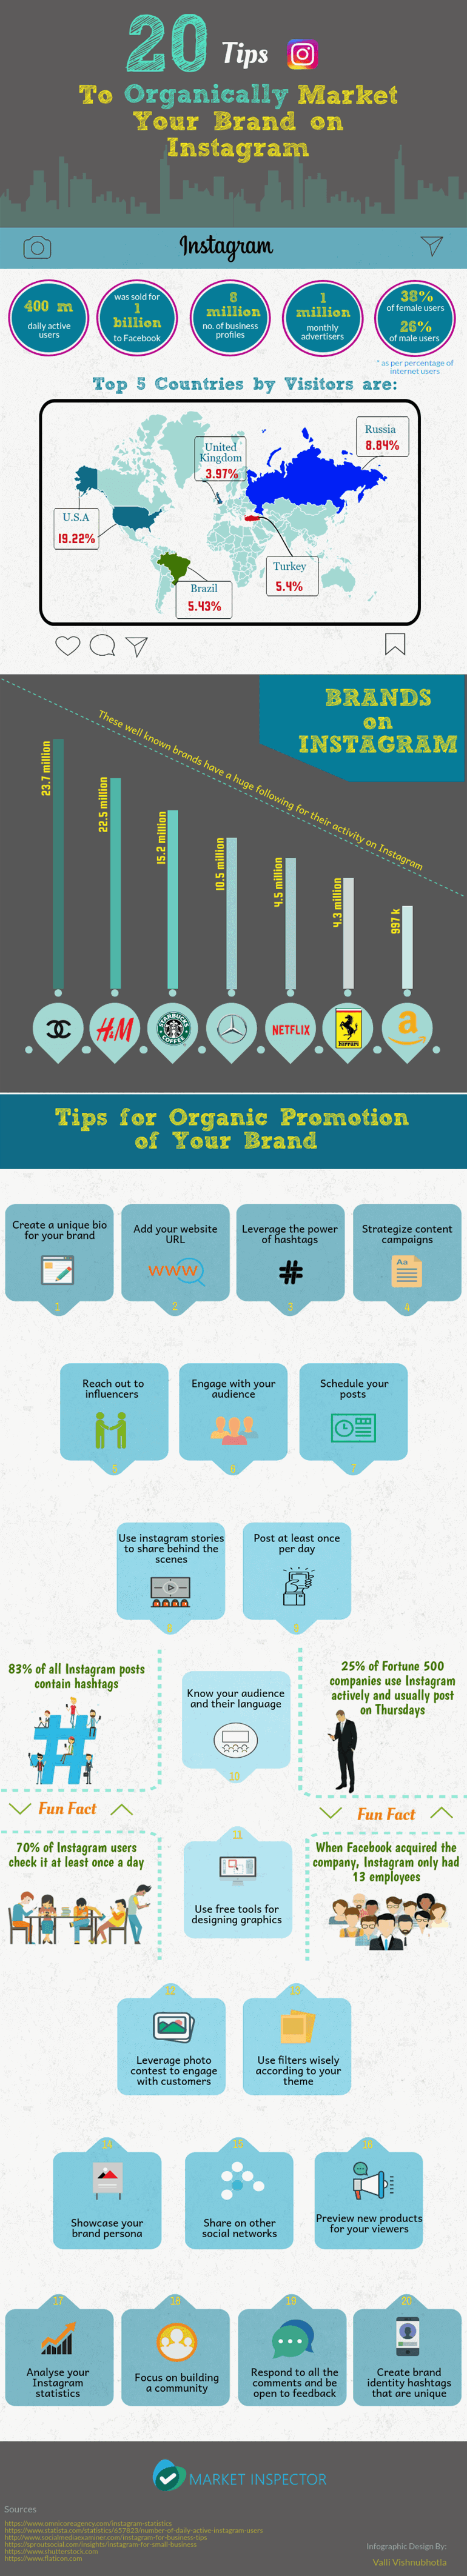 20 Tips to Market Your Brand Organically on Instagram